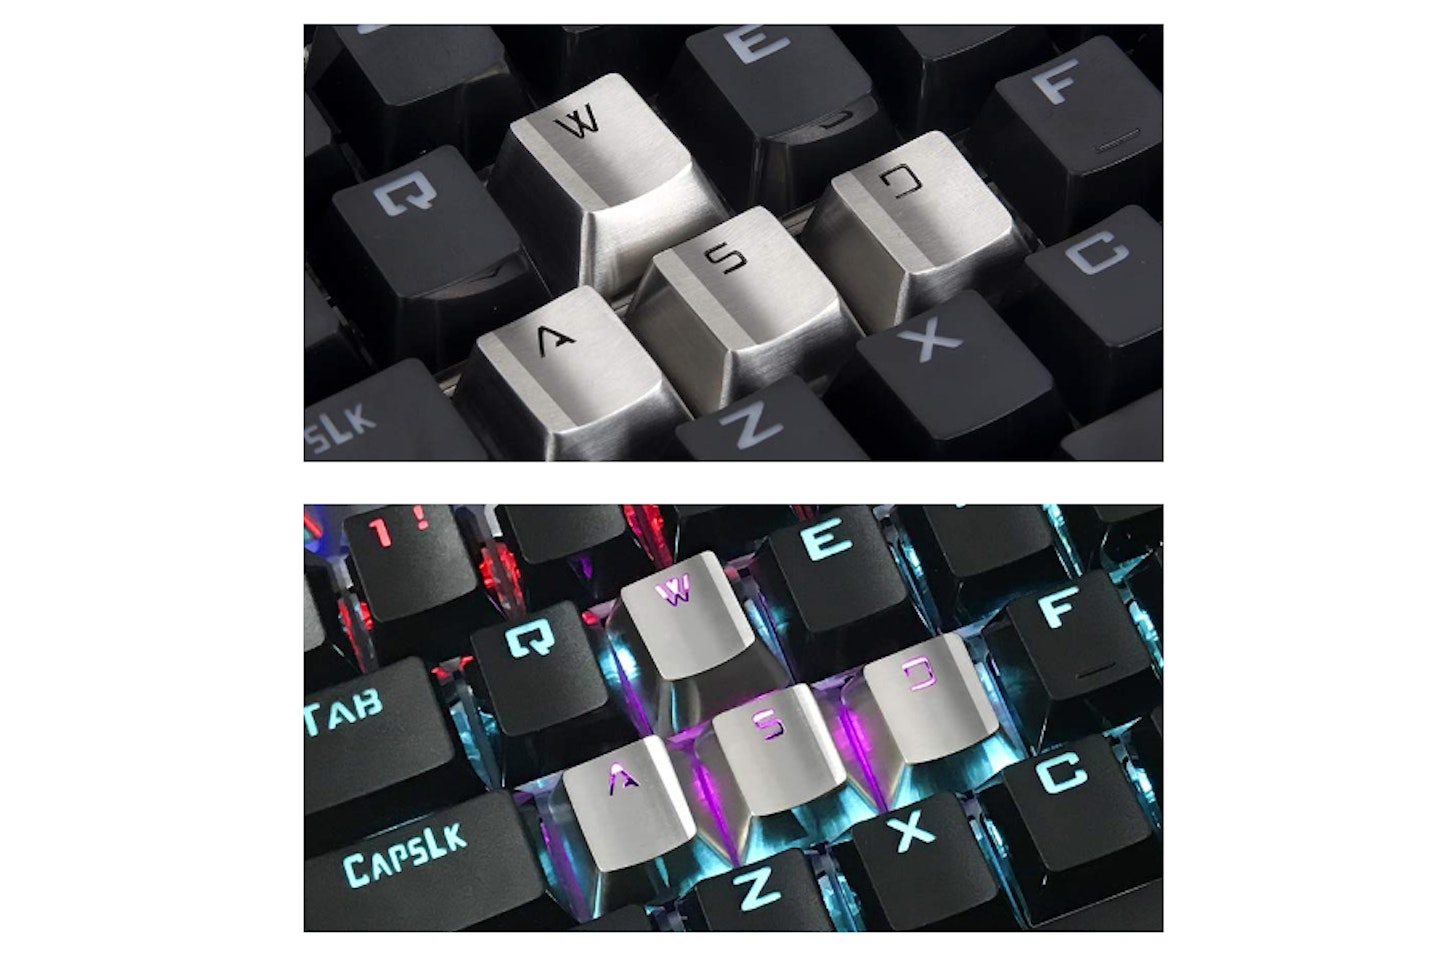 Stainless Steel WASD Mechanical Keycaps